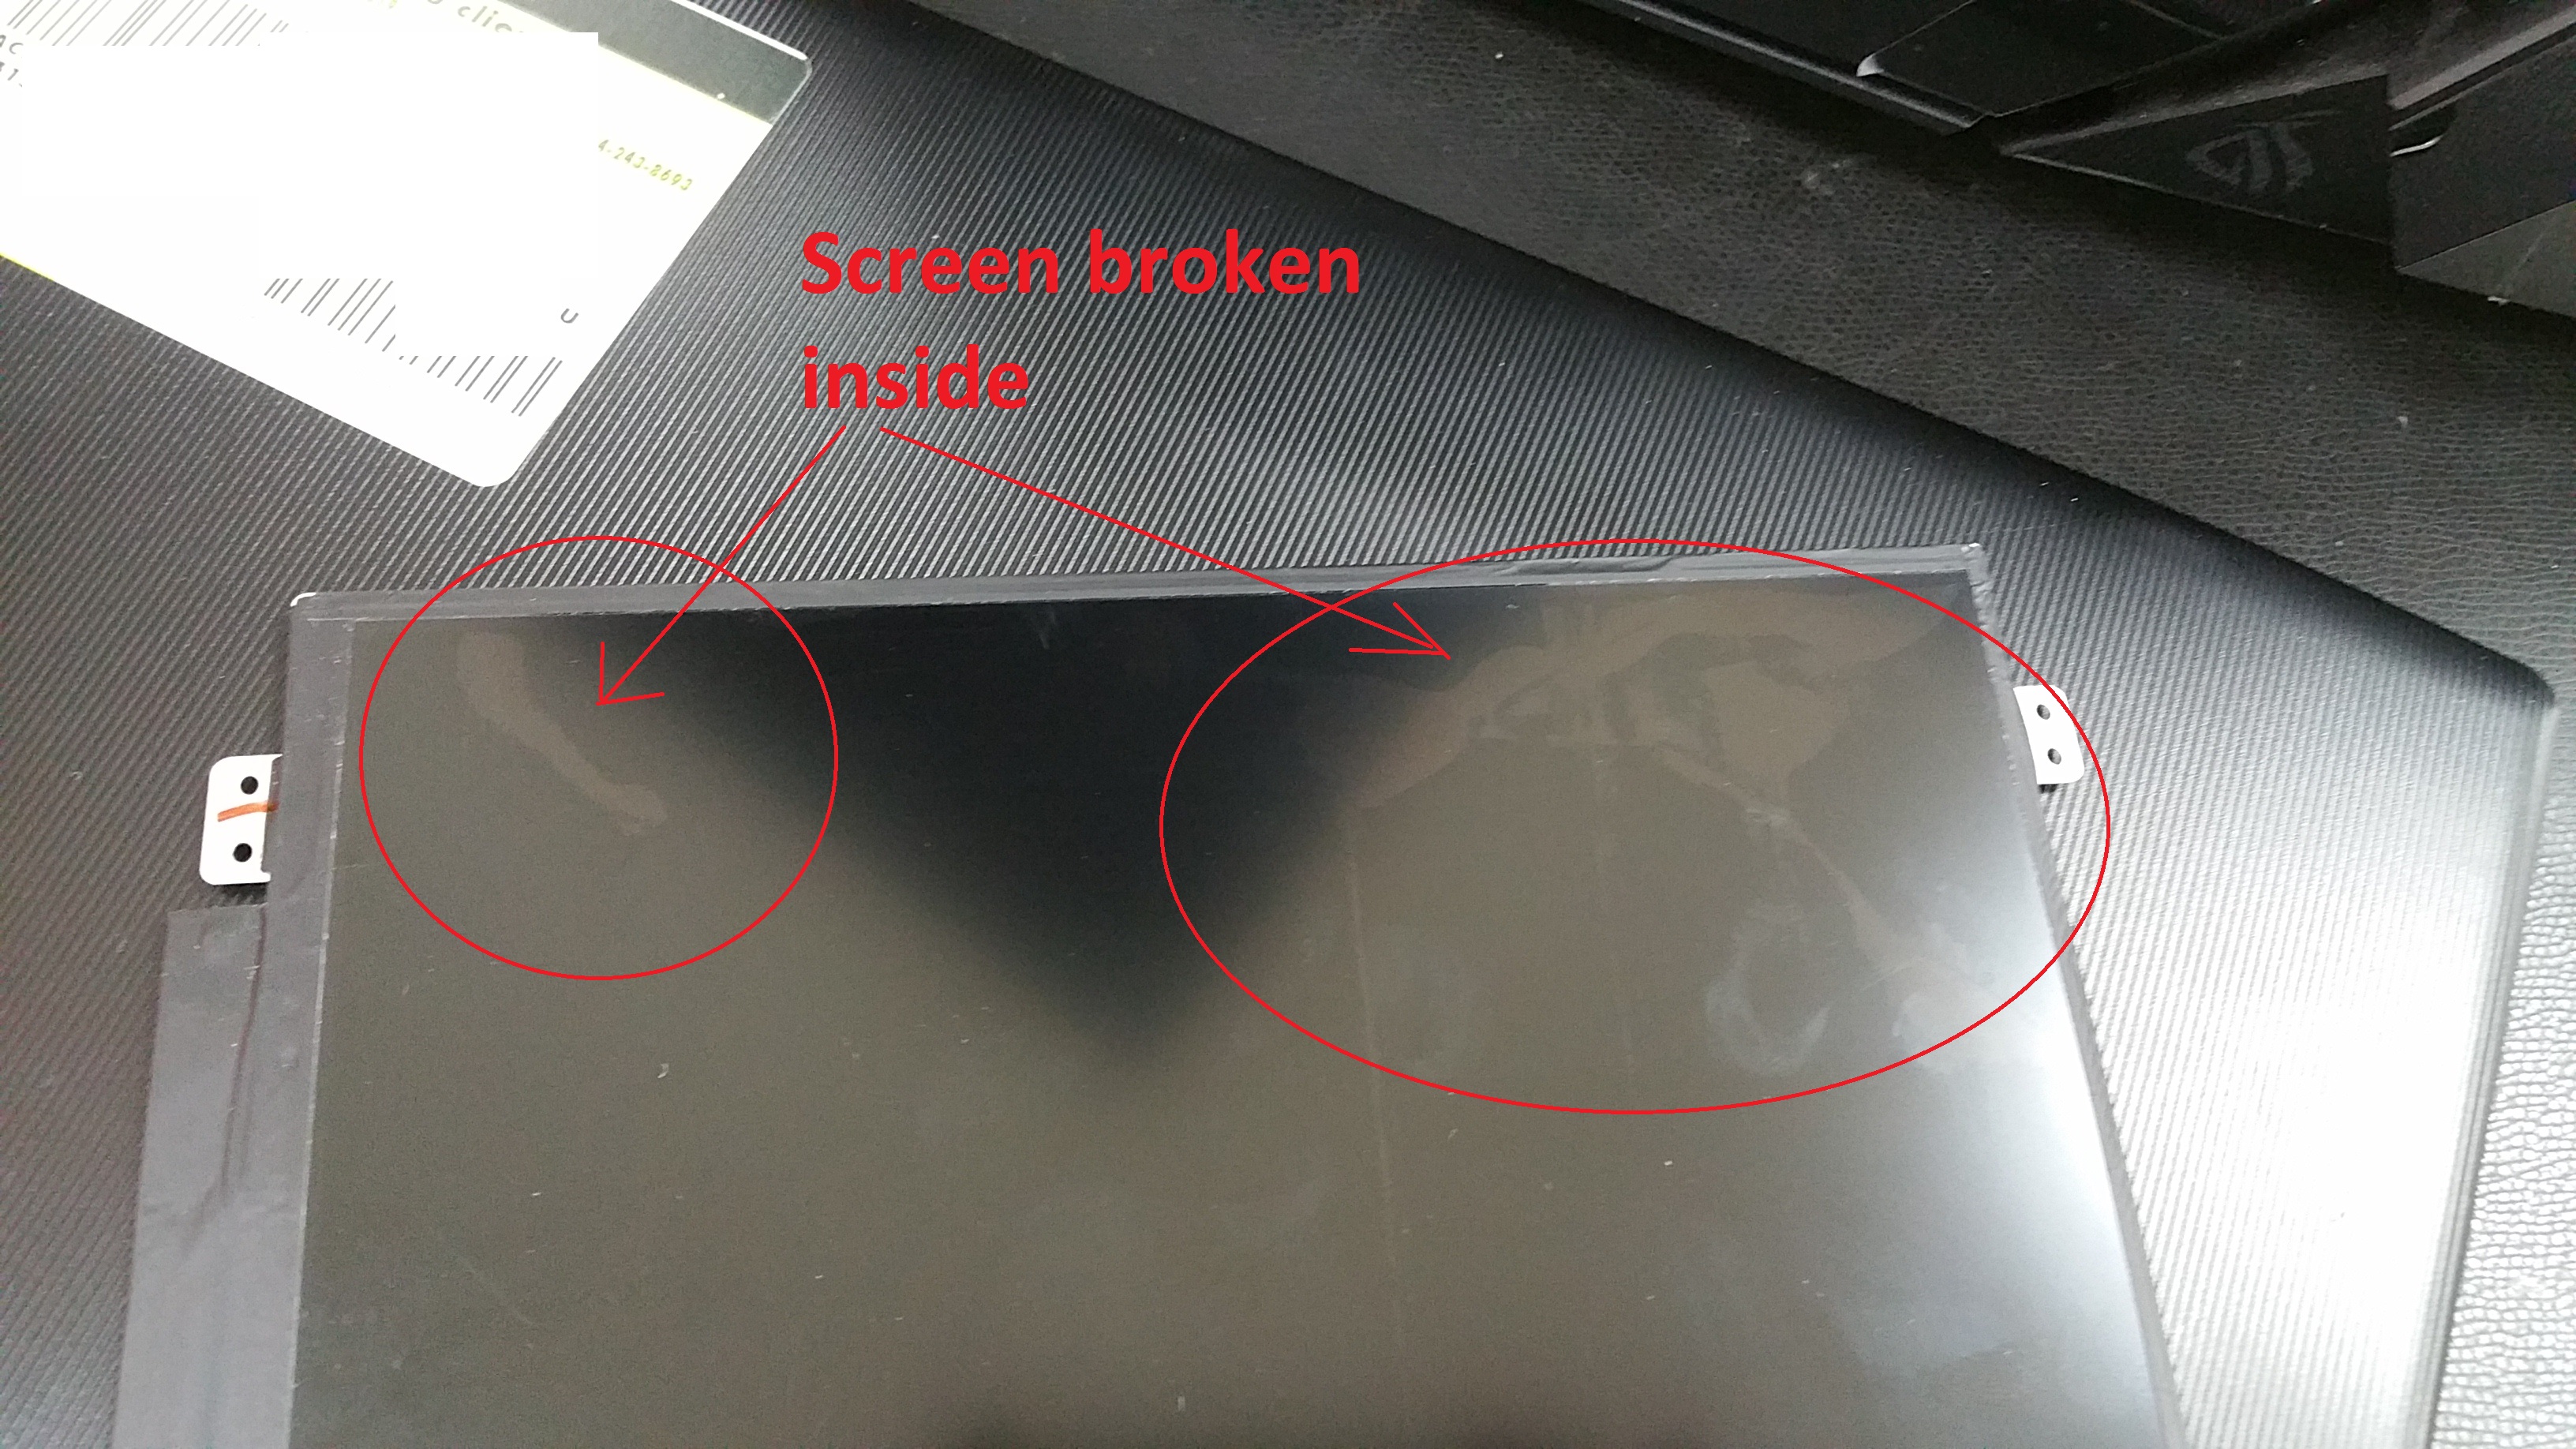 Check for physical damage to the monitor. If you see any physical damage, replace it with a new one.